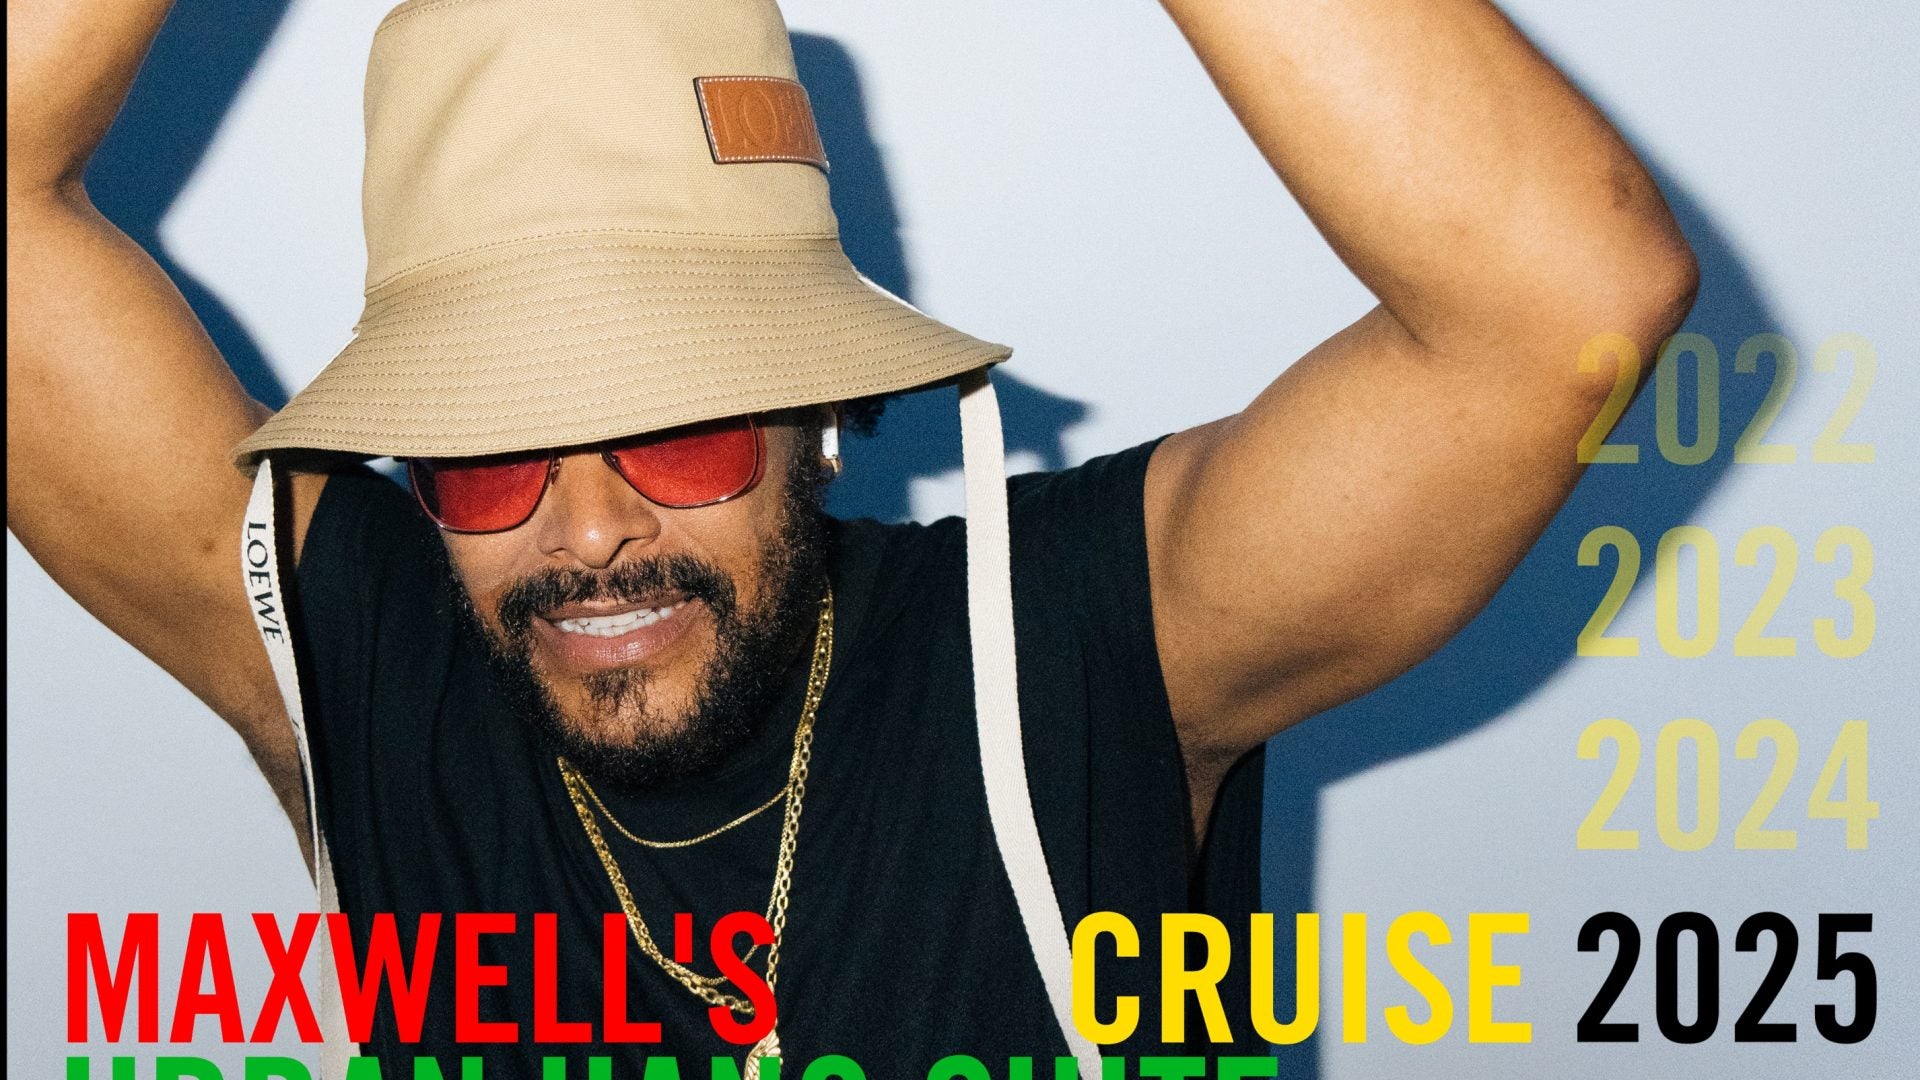 Maxwell's Urban Hang Suite Cruise On The Norwegian Pearl Is Returning For A Second Excursion